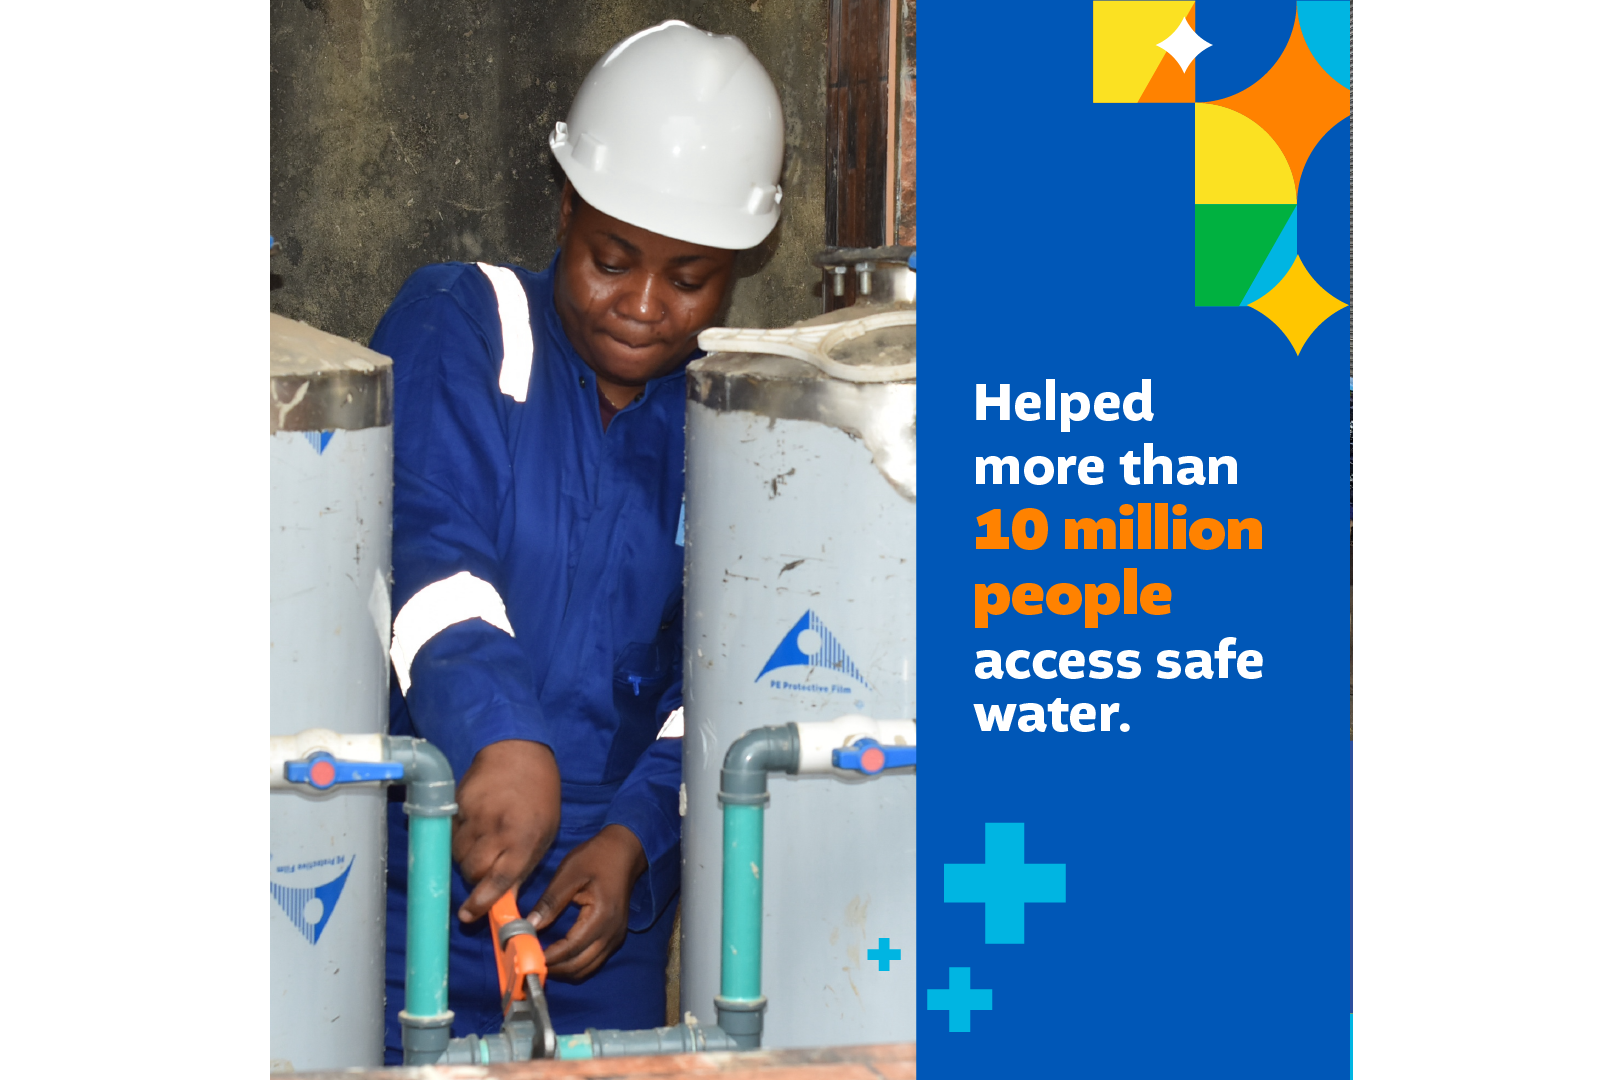 Helped more than 10 million people access safe water